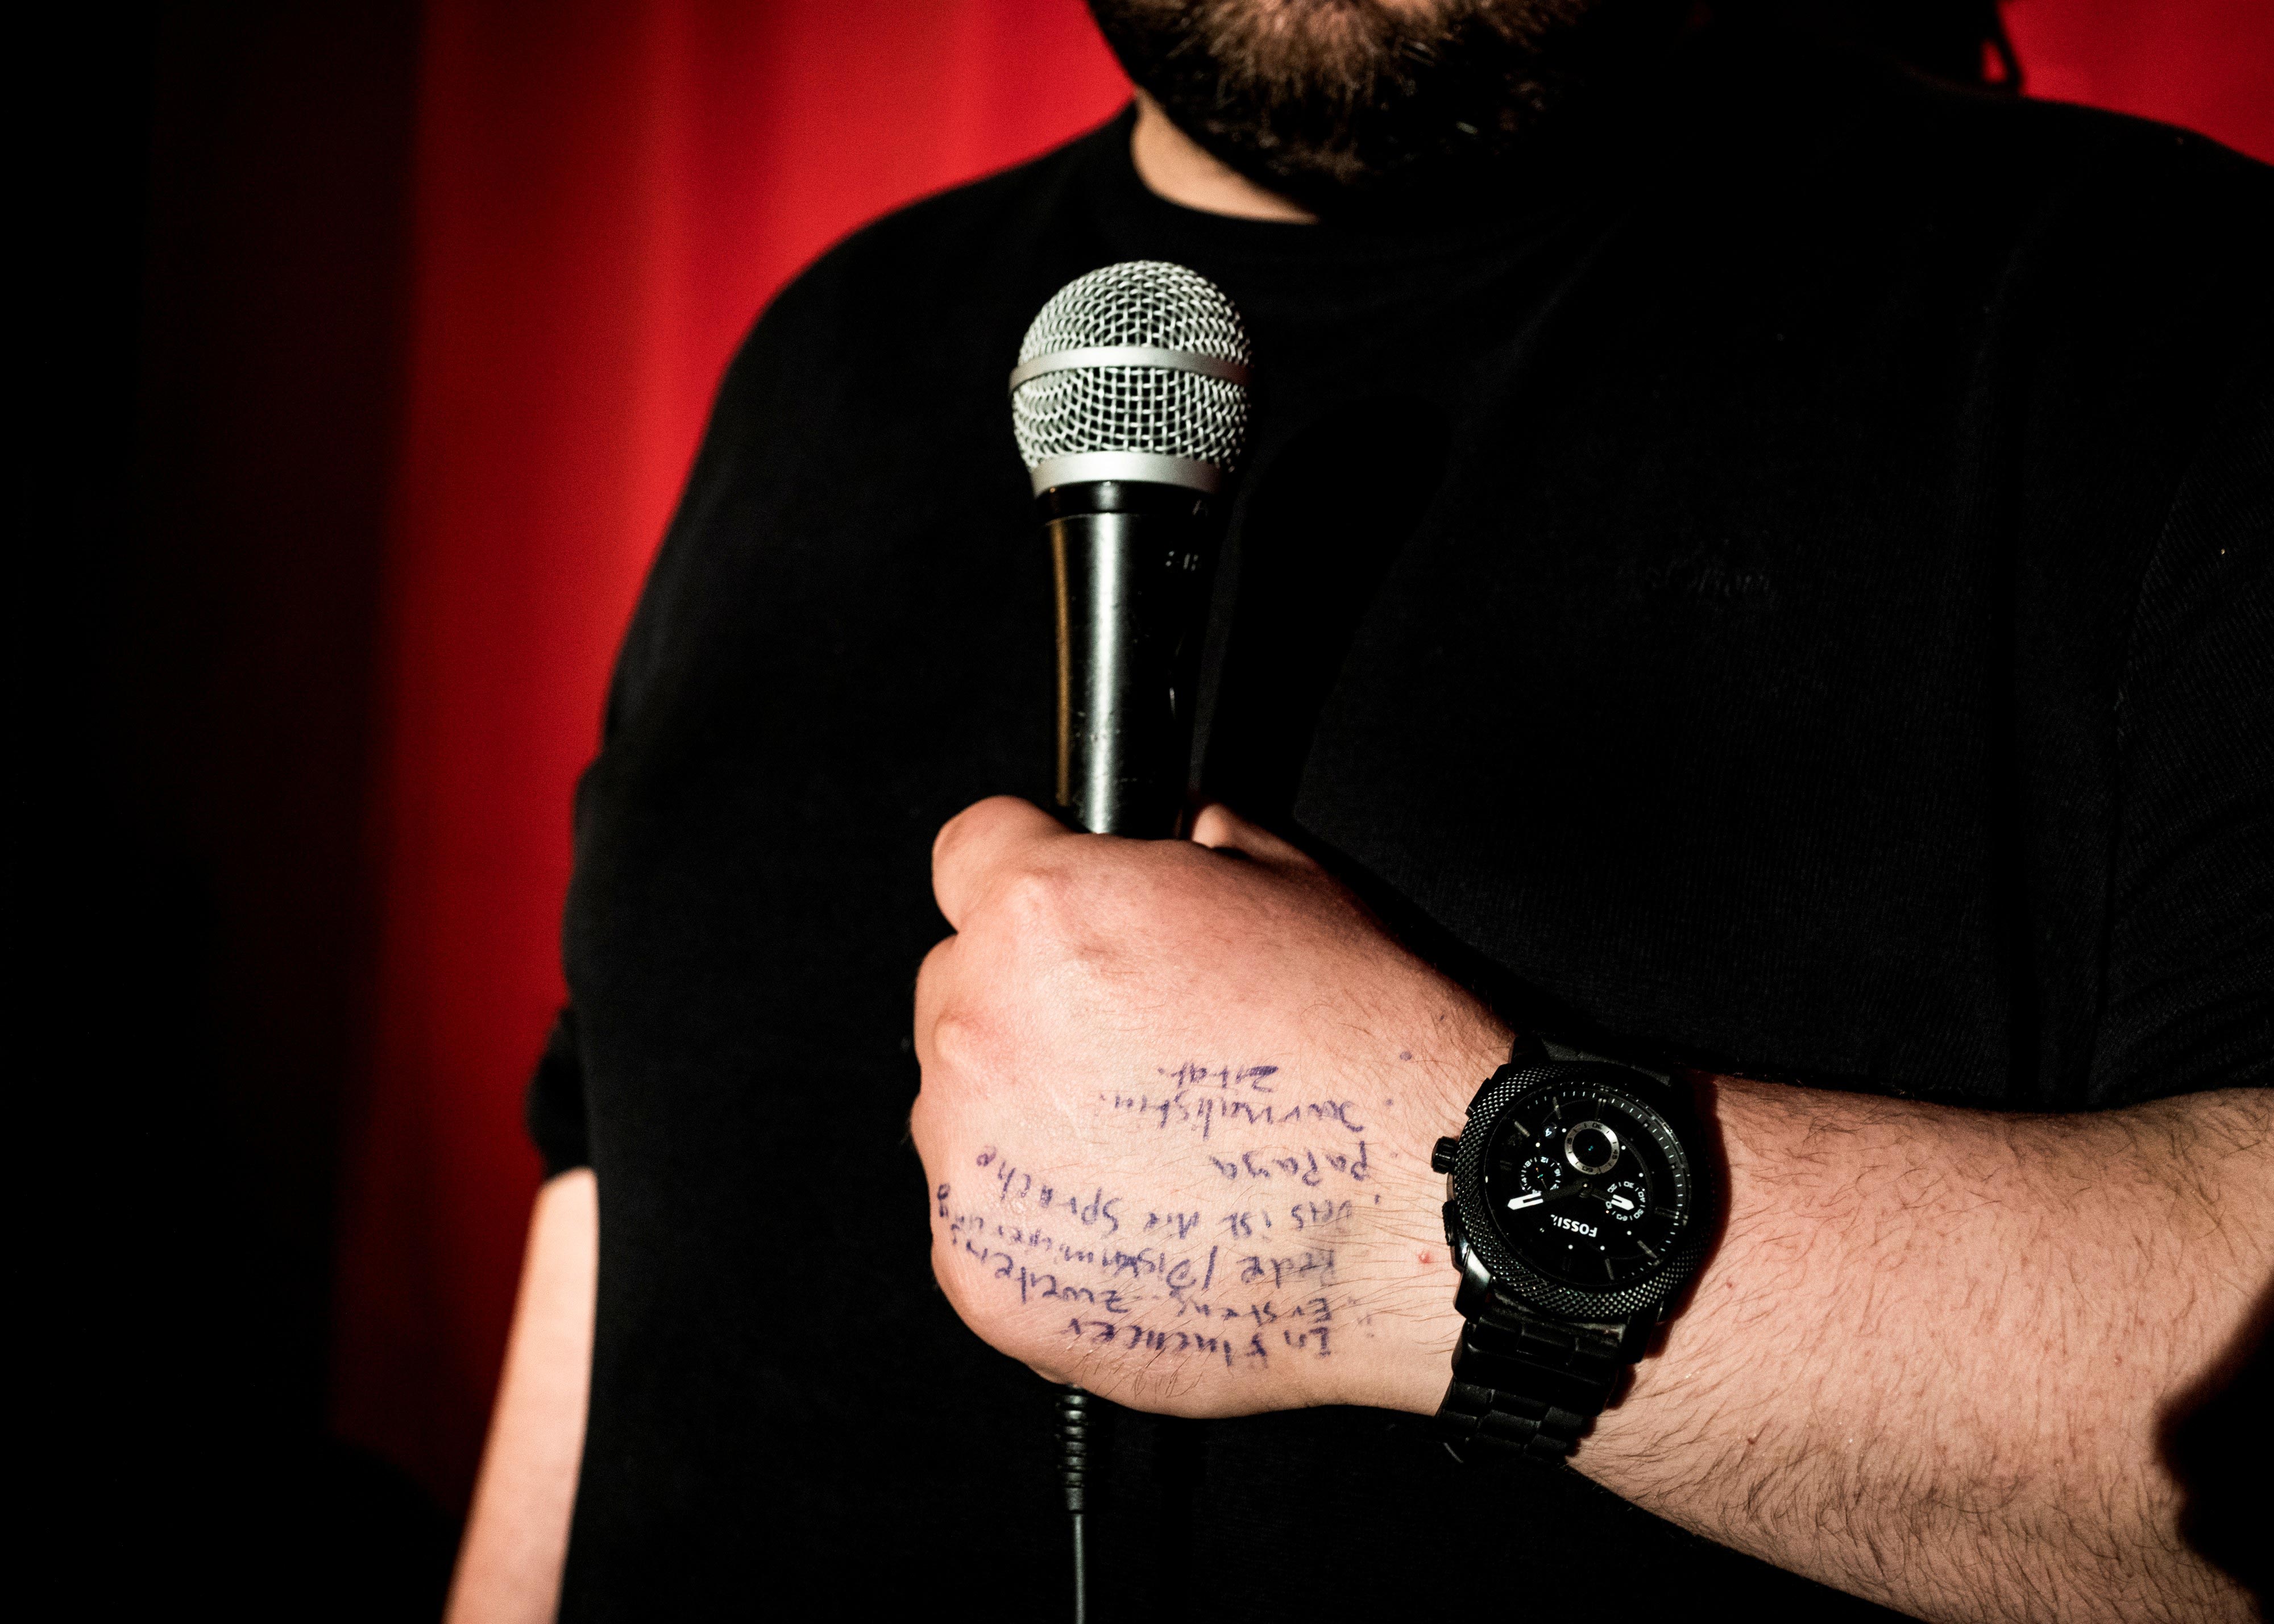 Important for stand-up comedy: just doing it, even if the ideas are not yet perfectly formed